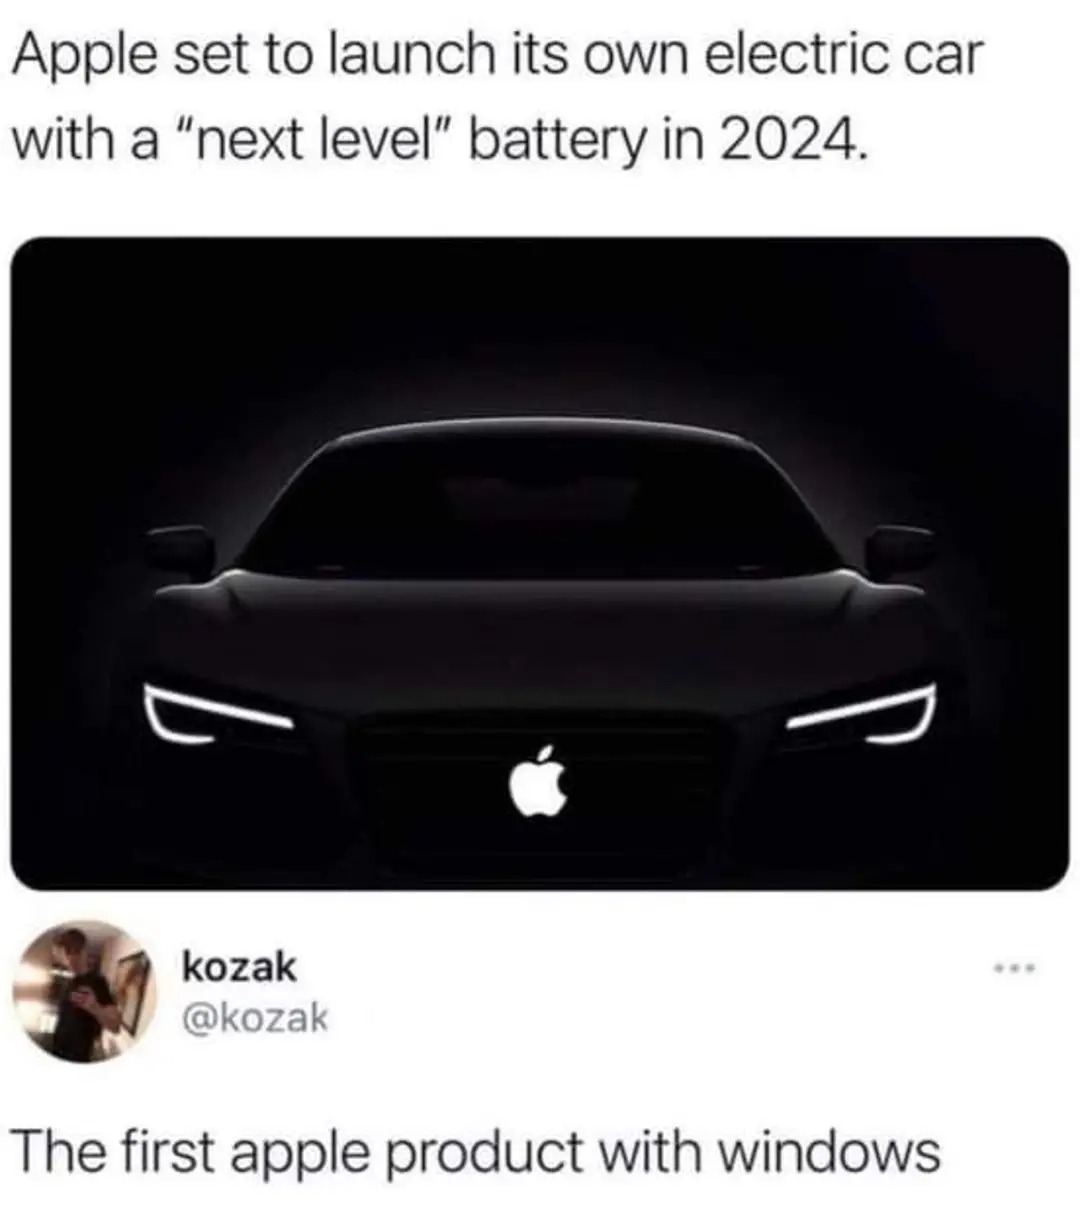 Apple set to launch its own electric car with a "next level" battery in 2024.  The first apple product with windows.